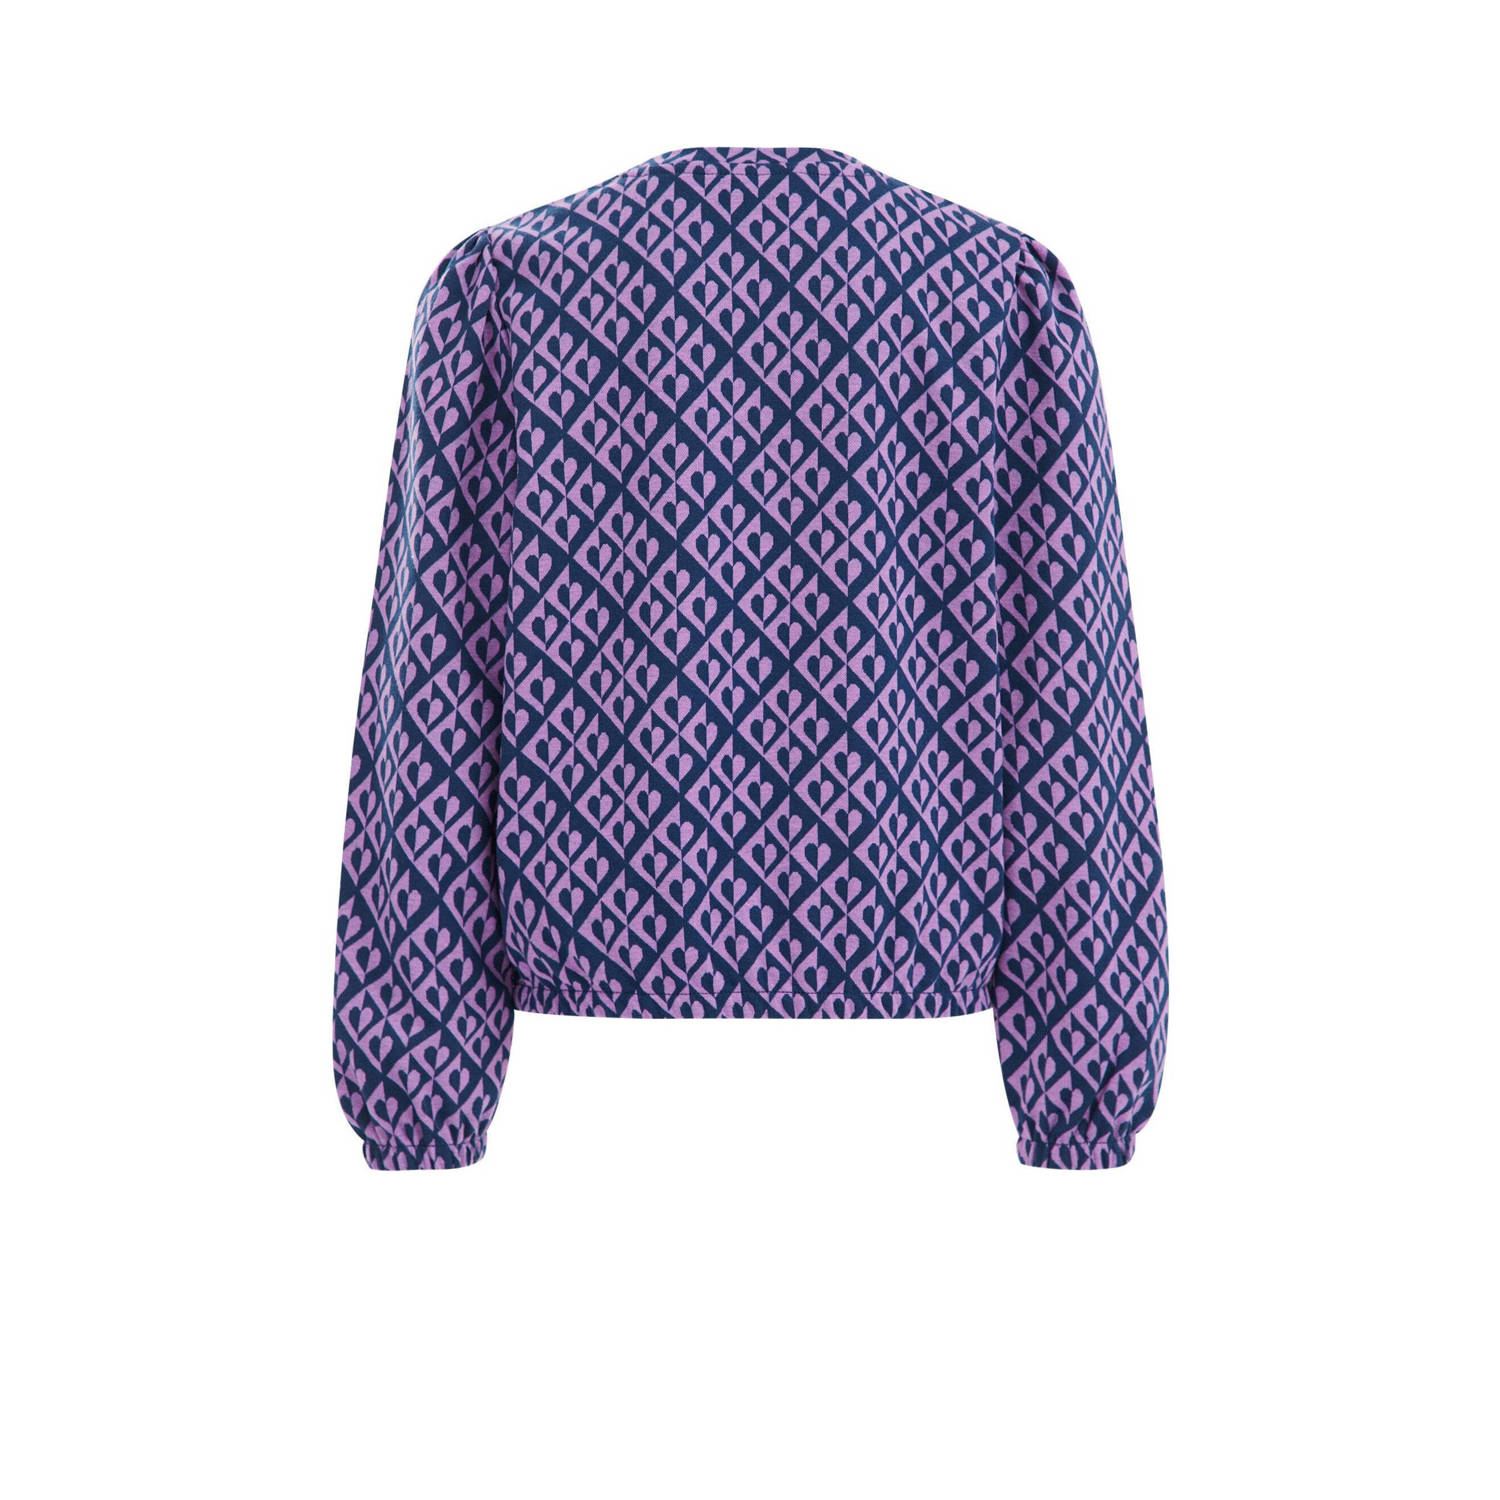 WE Fashion sweater met all over print blauw lila